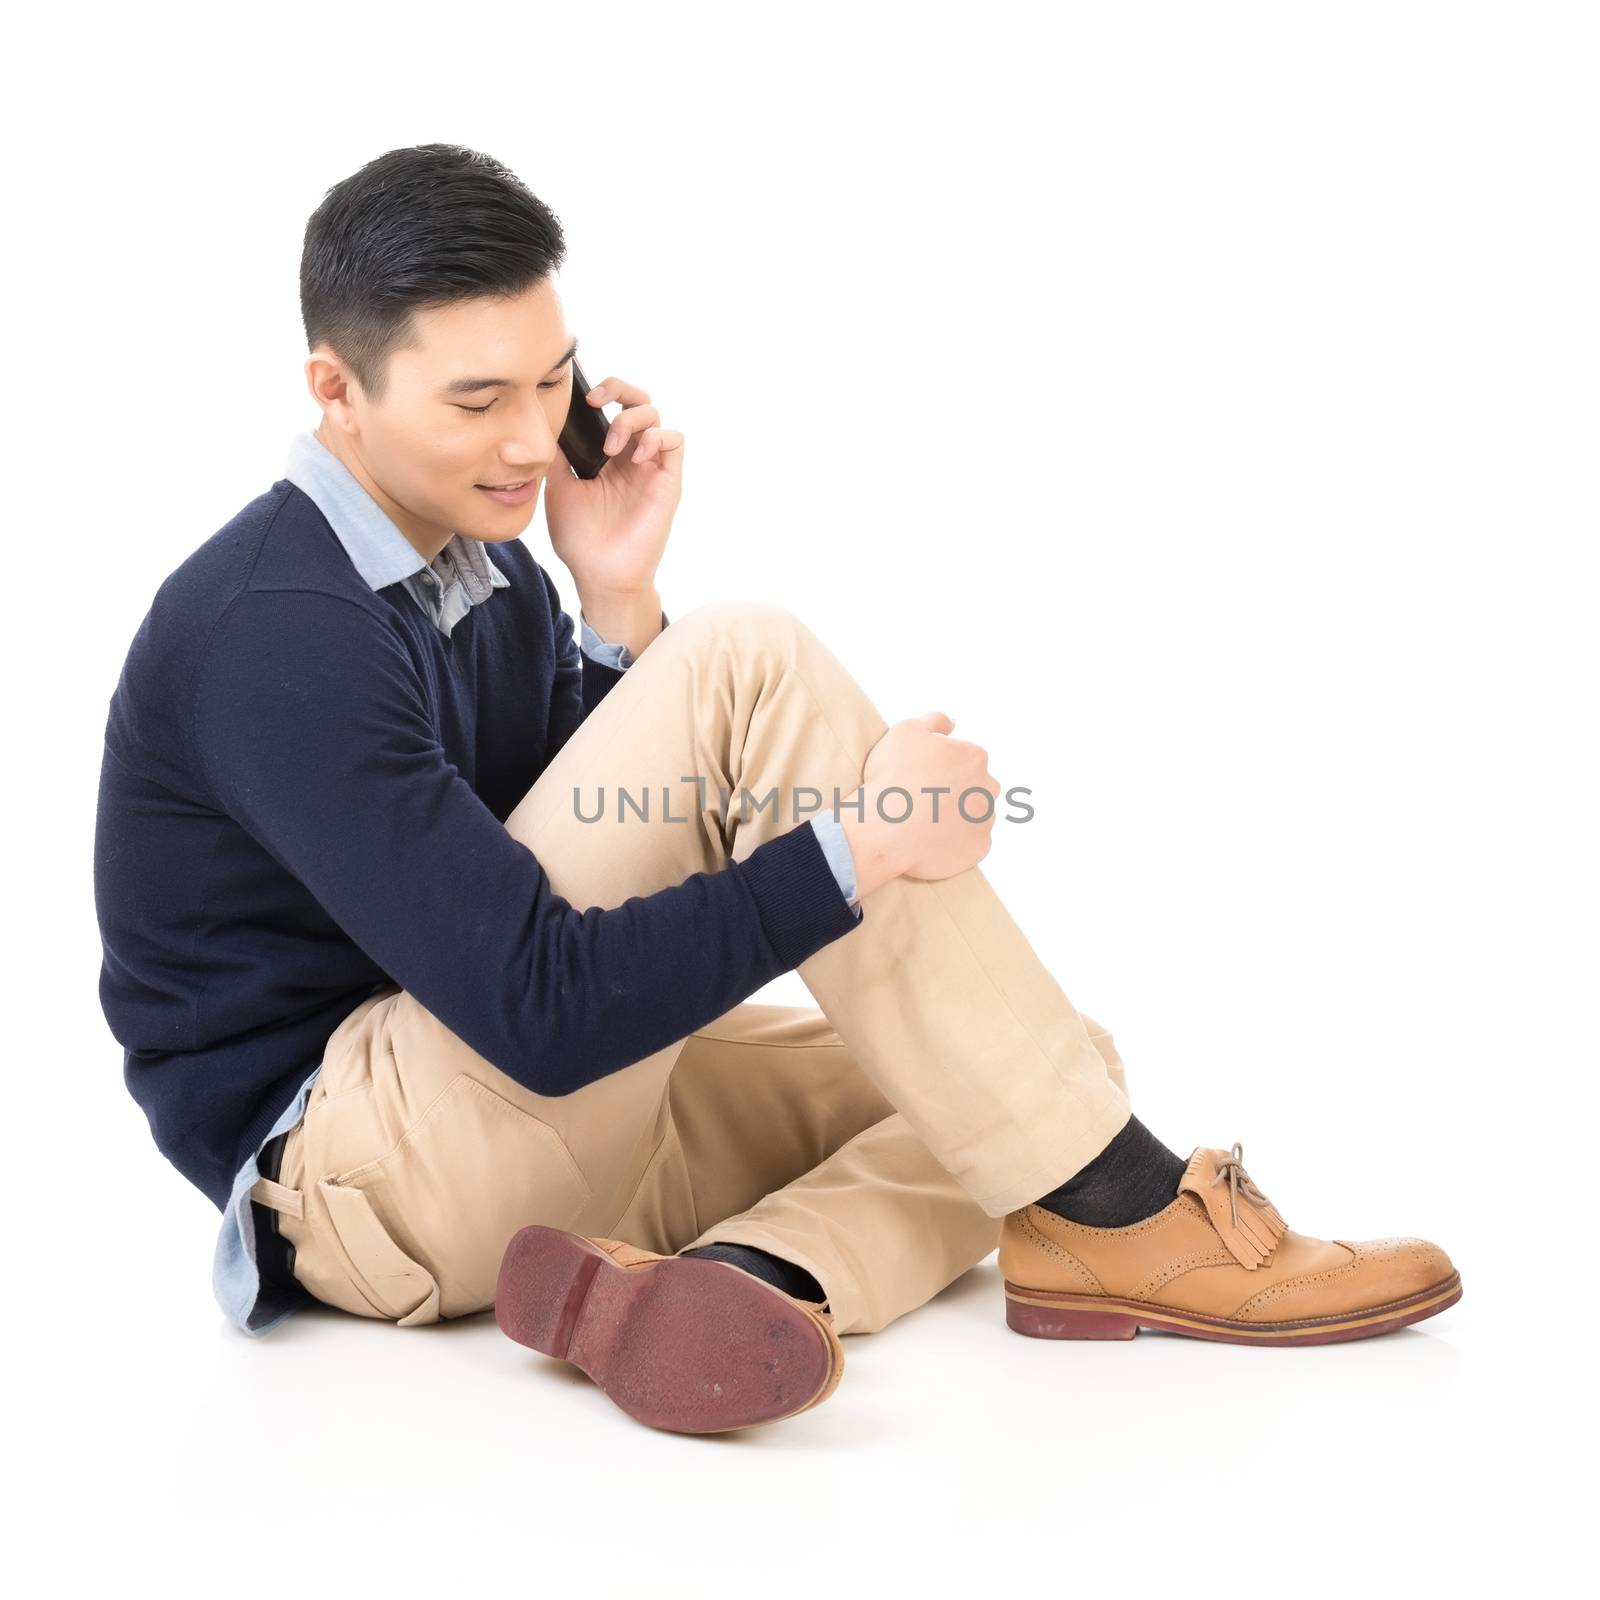 Handsome Asian guy sit and take a call, full length portrait isolated on white background.